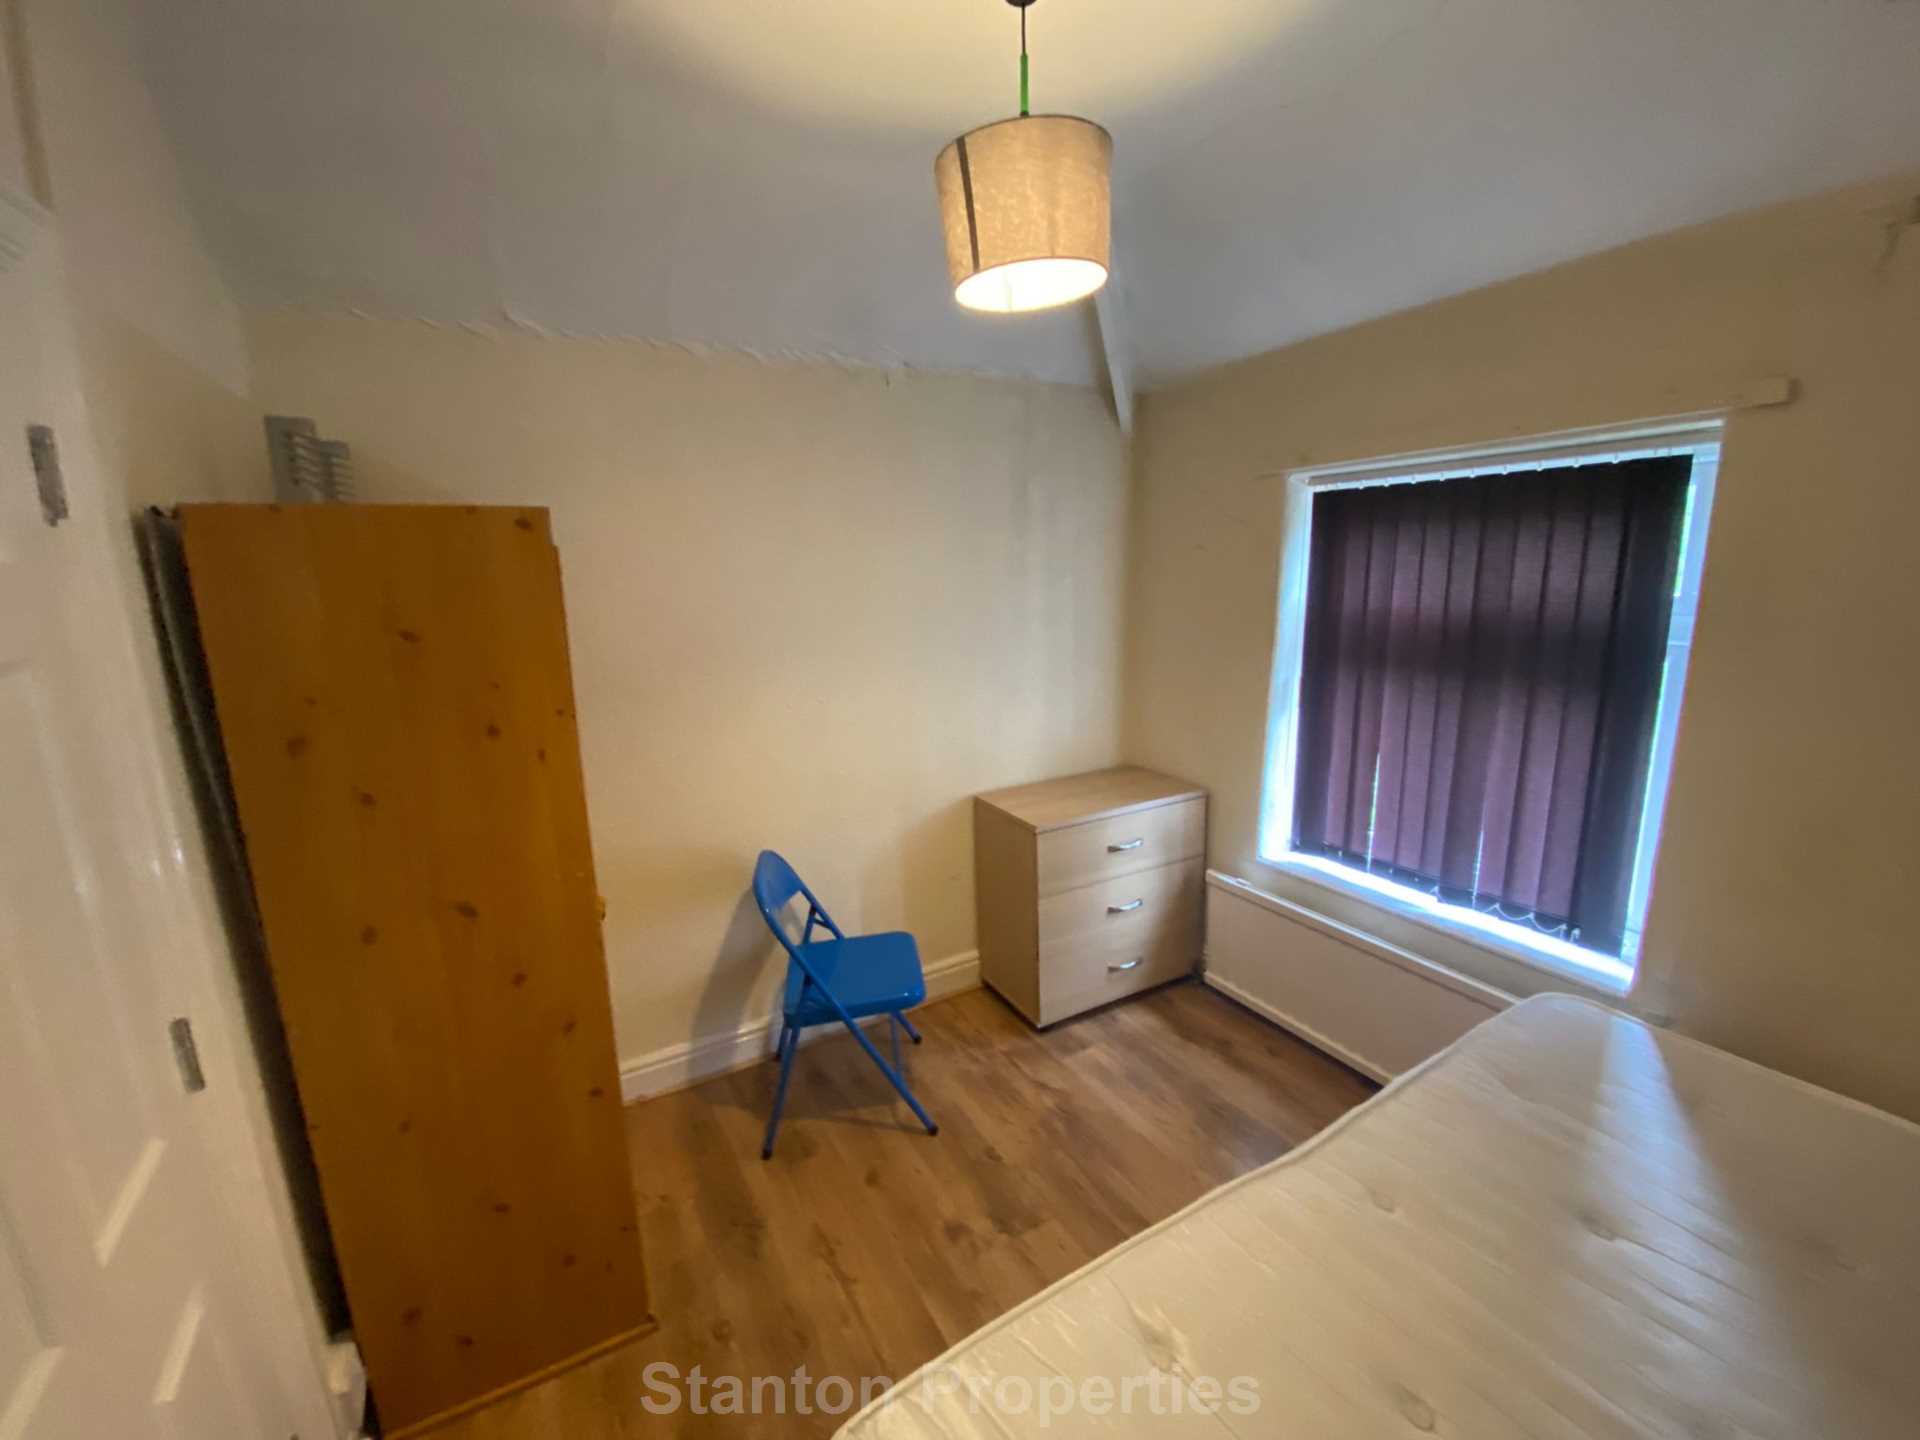 £120 pppw, Weld Road, Withington, Image 16